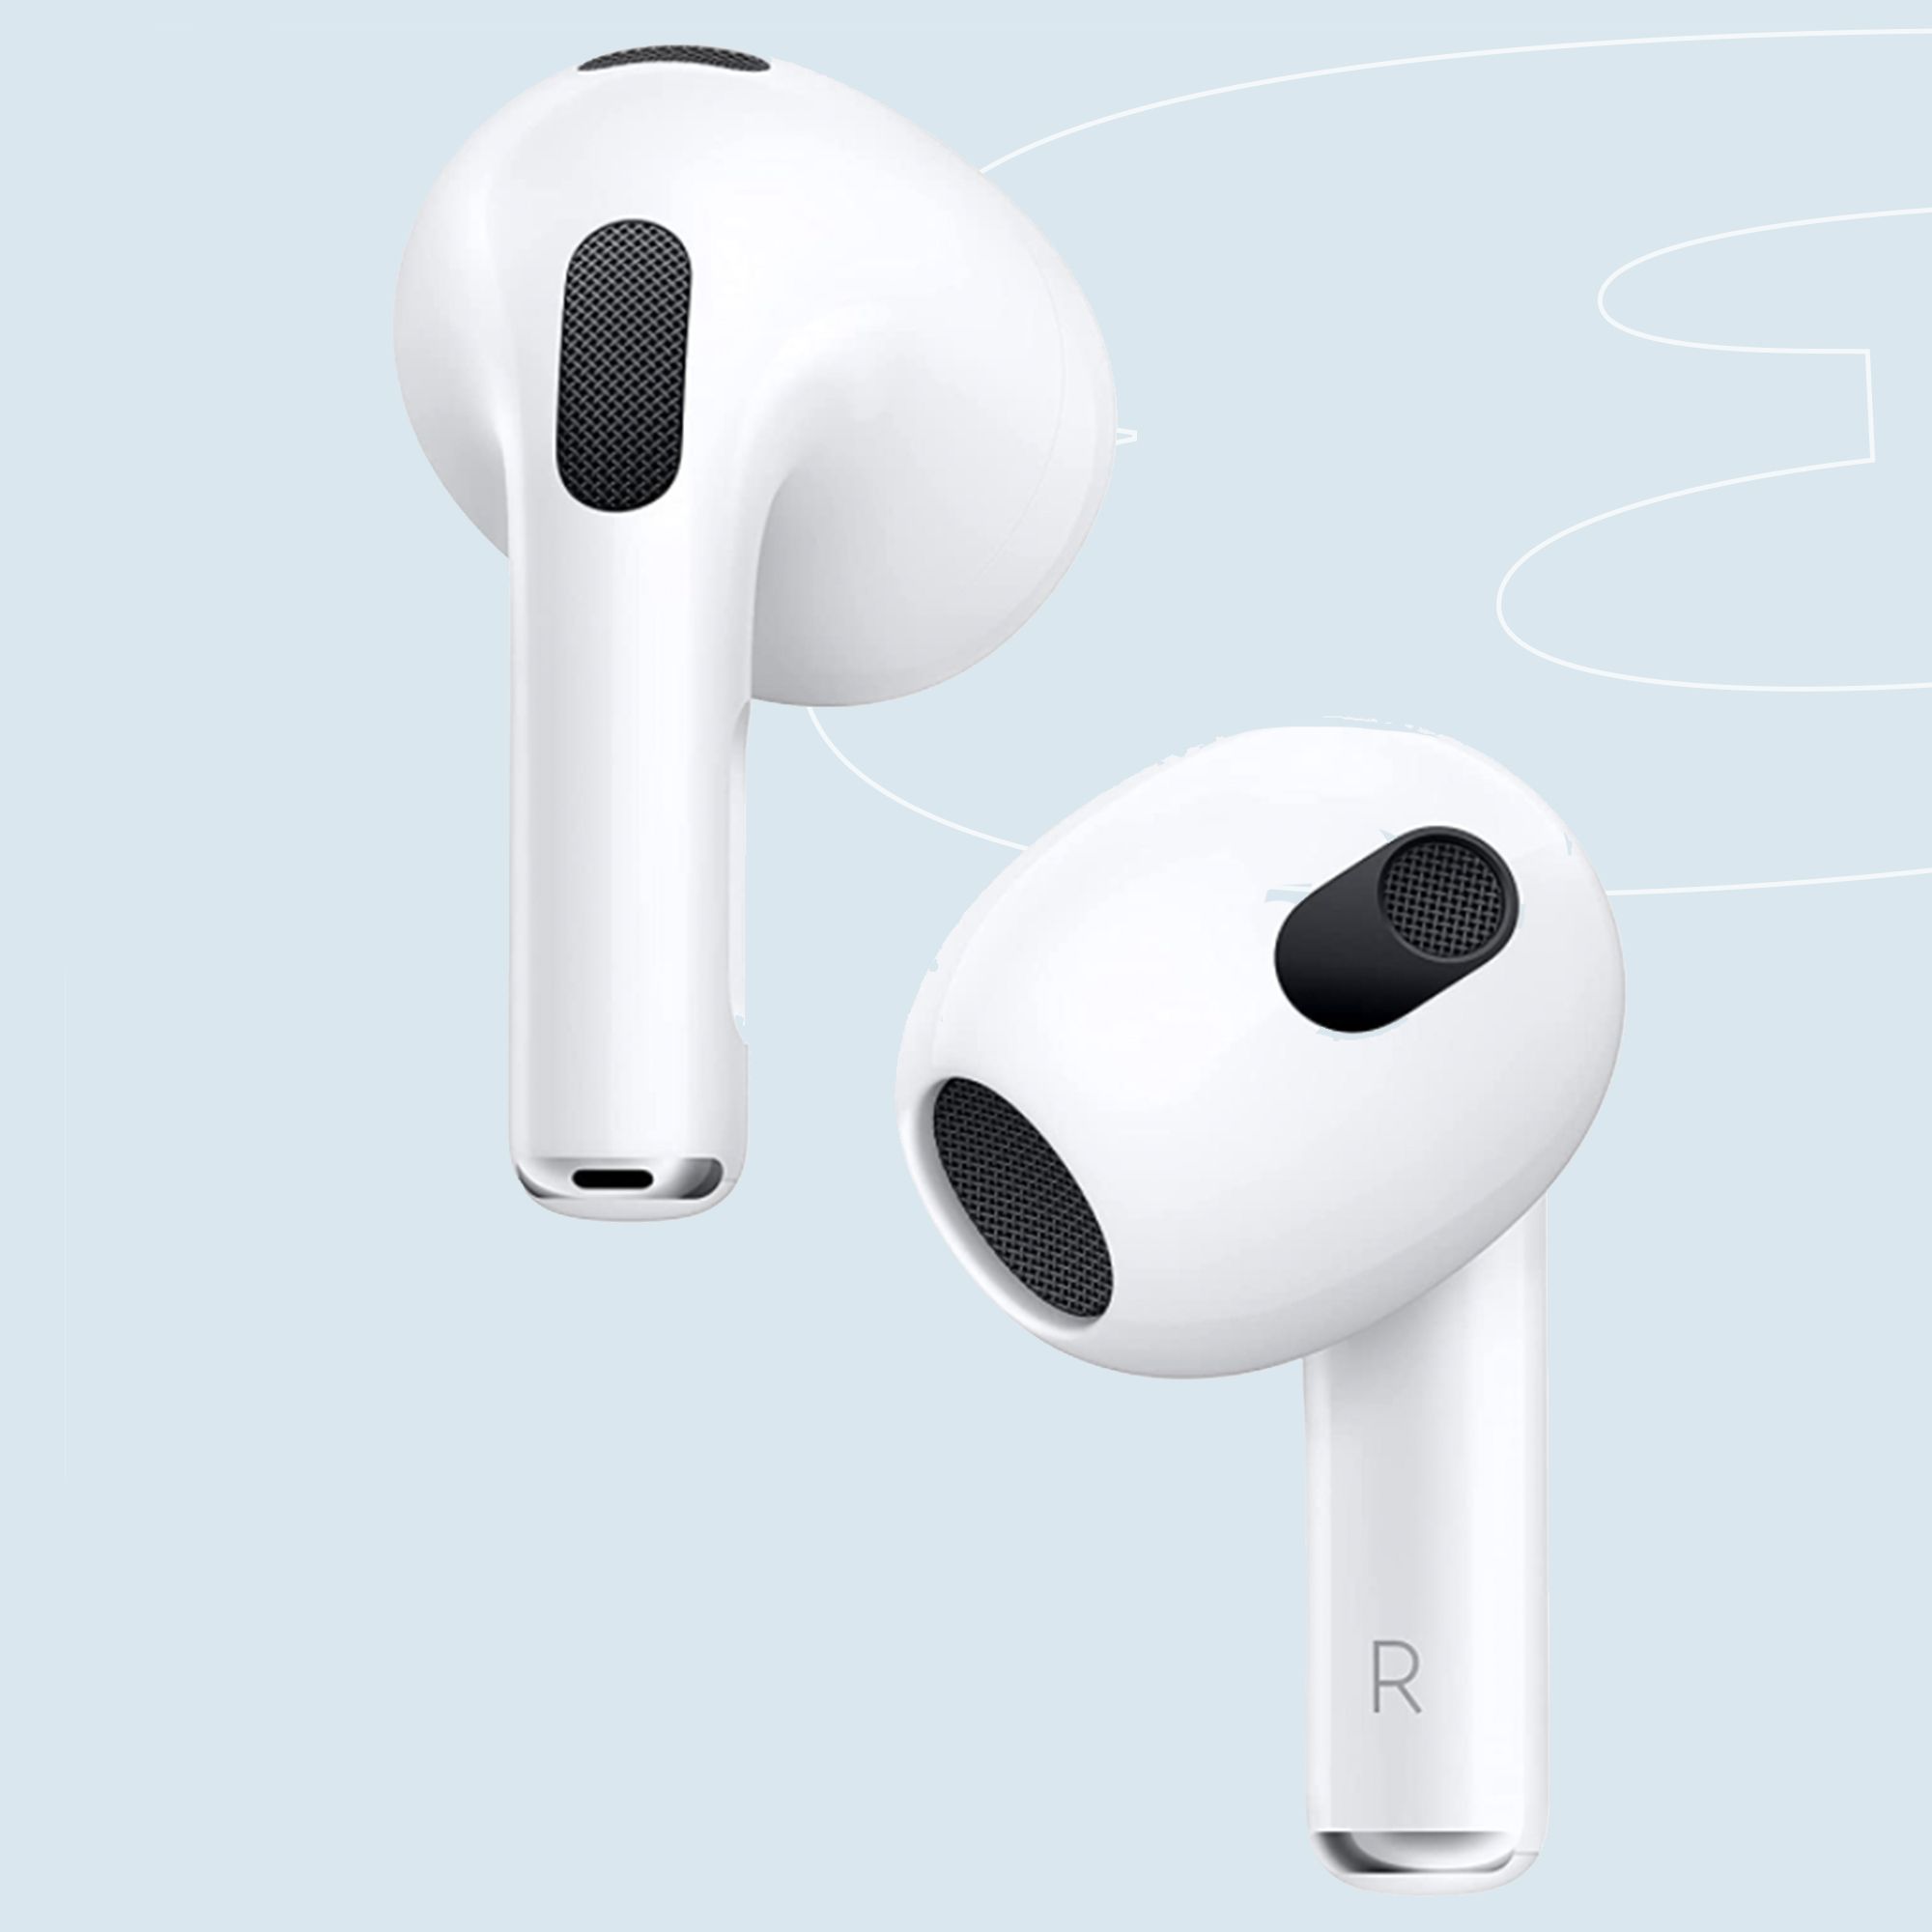 Amazon's Pre-Prime Day Sale on AirPods Is Legit